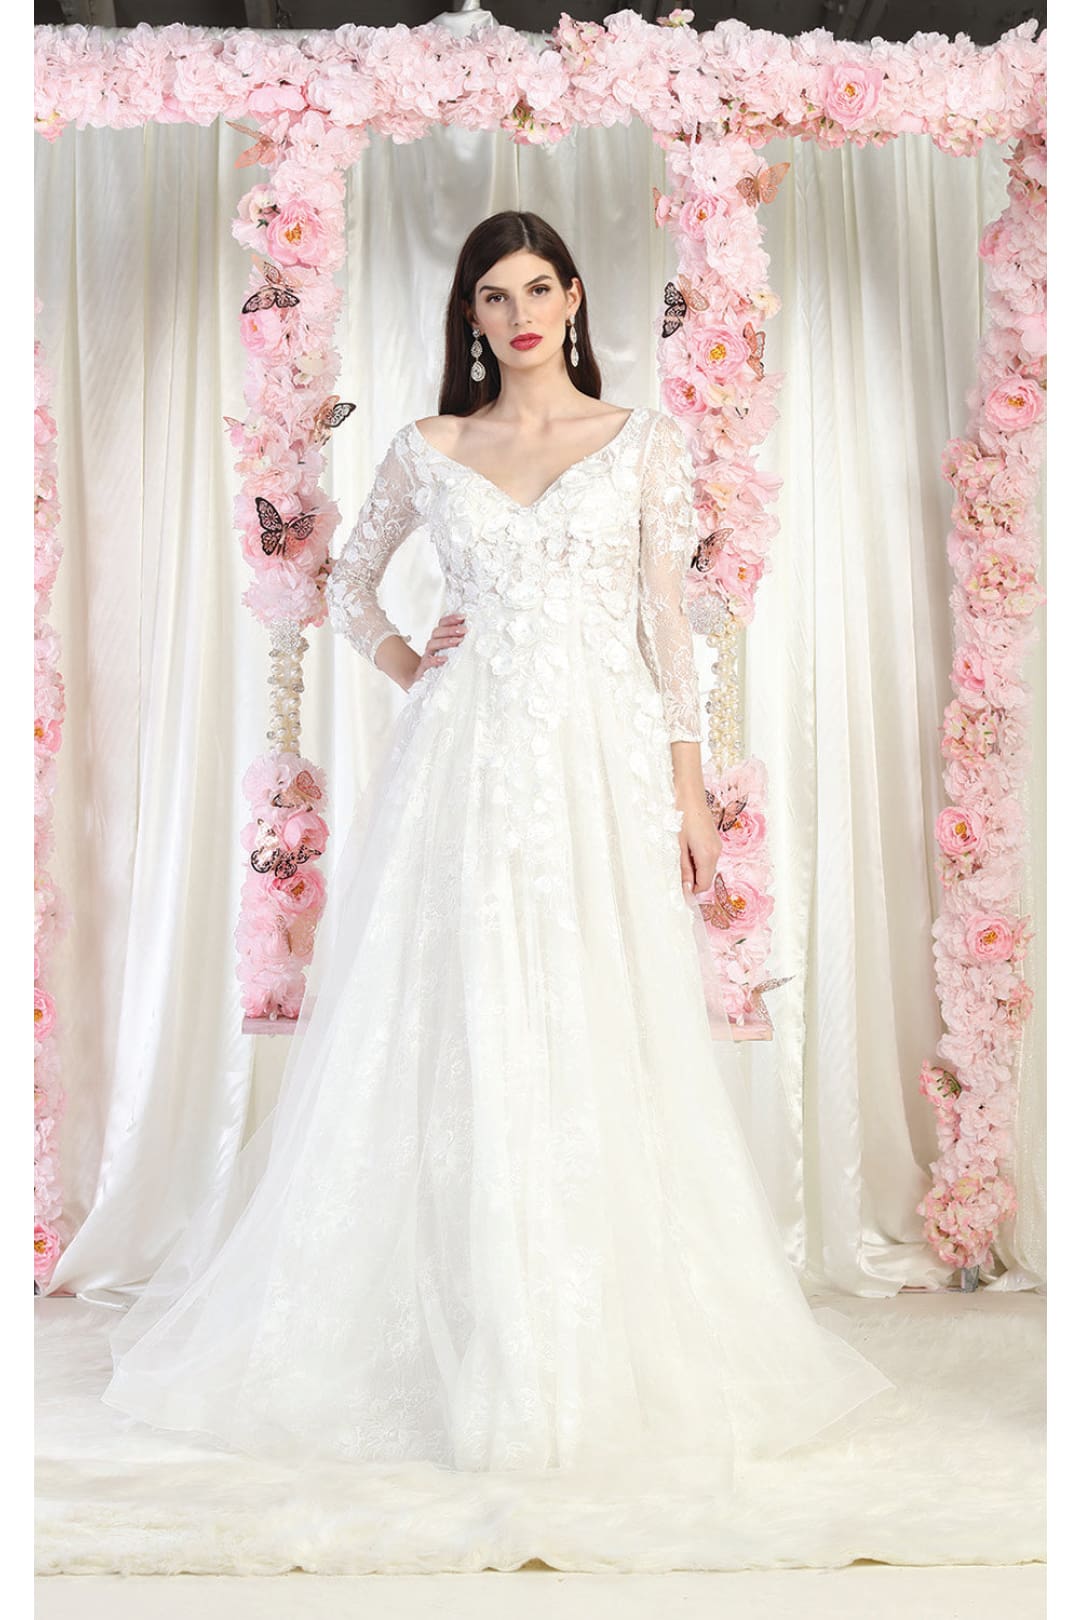 Royal Queen RQ7996 Long Sleeve Floral Bridal Gown - Dress